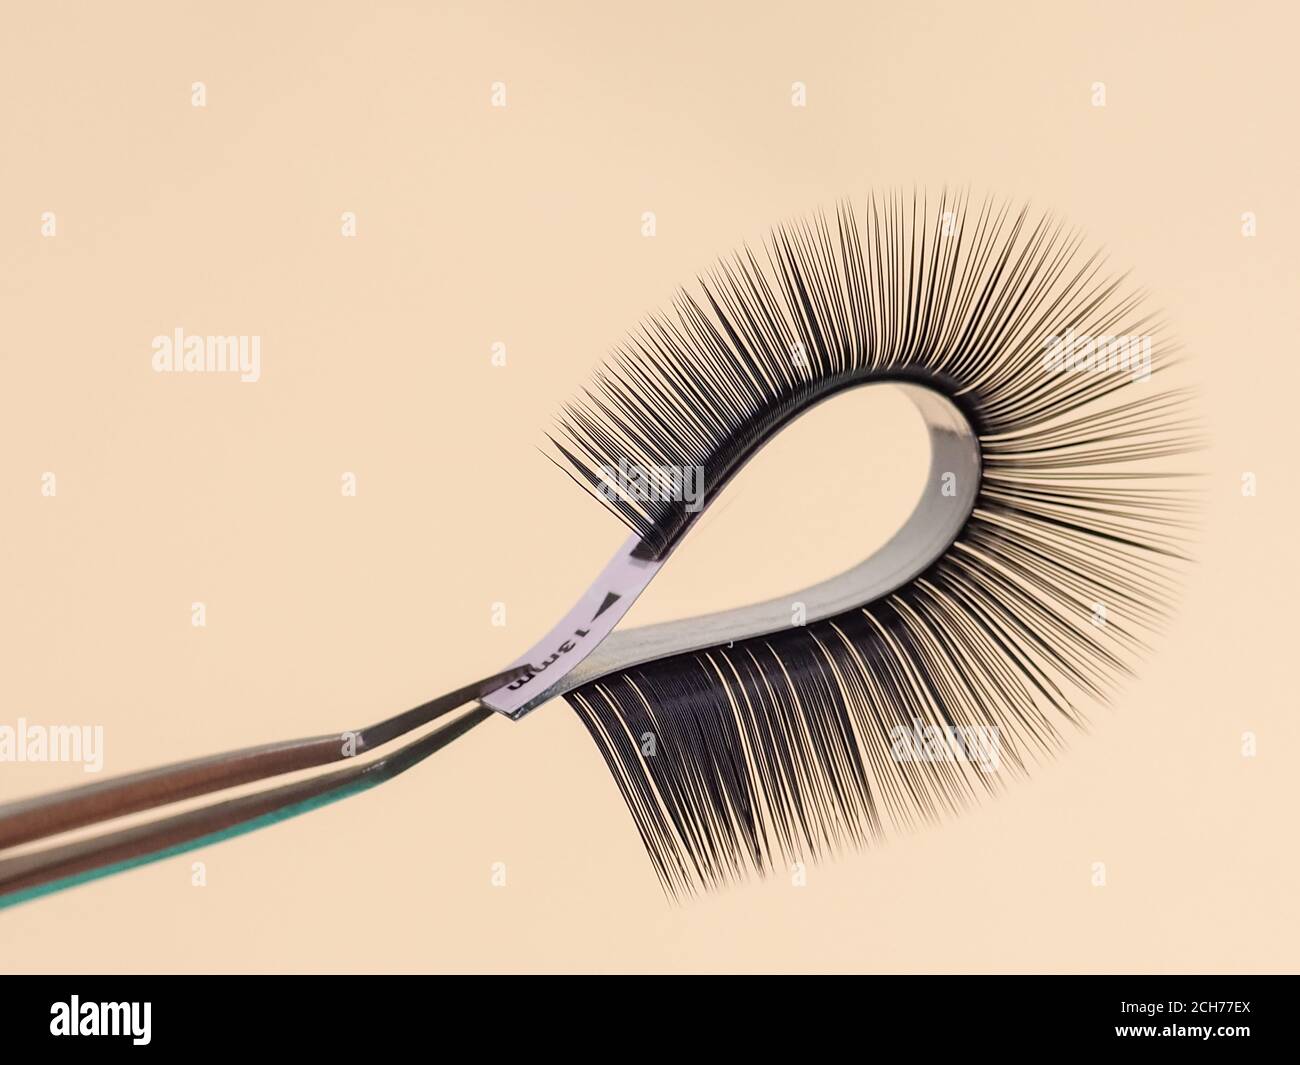 strip for eyelash extensions on a uniform tone, twisted, held with tweezers. Industry artificial eyelashes, eyelash extensions, beauty Stock Photo